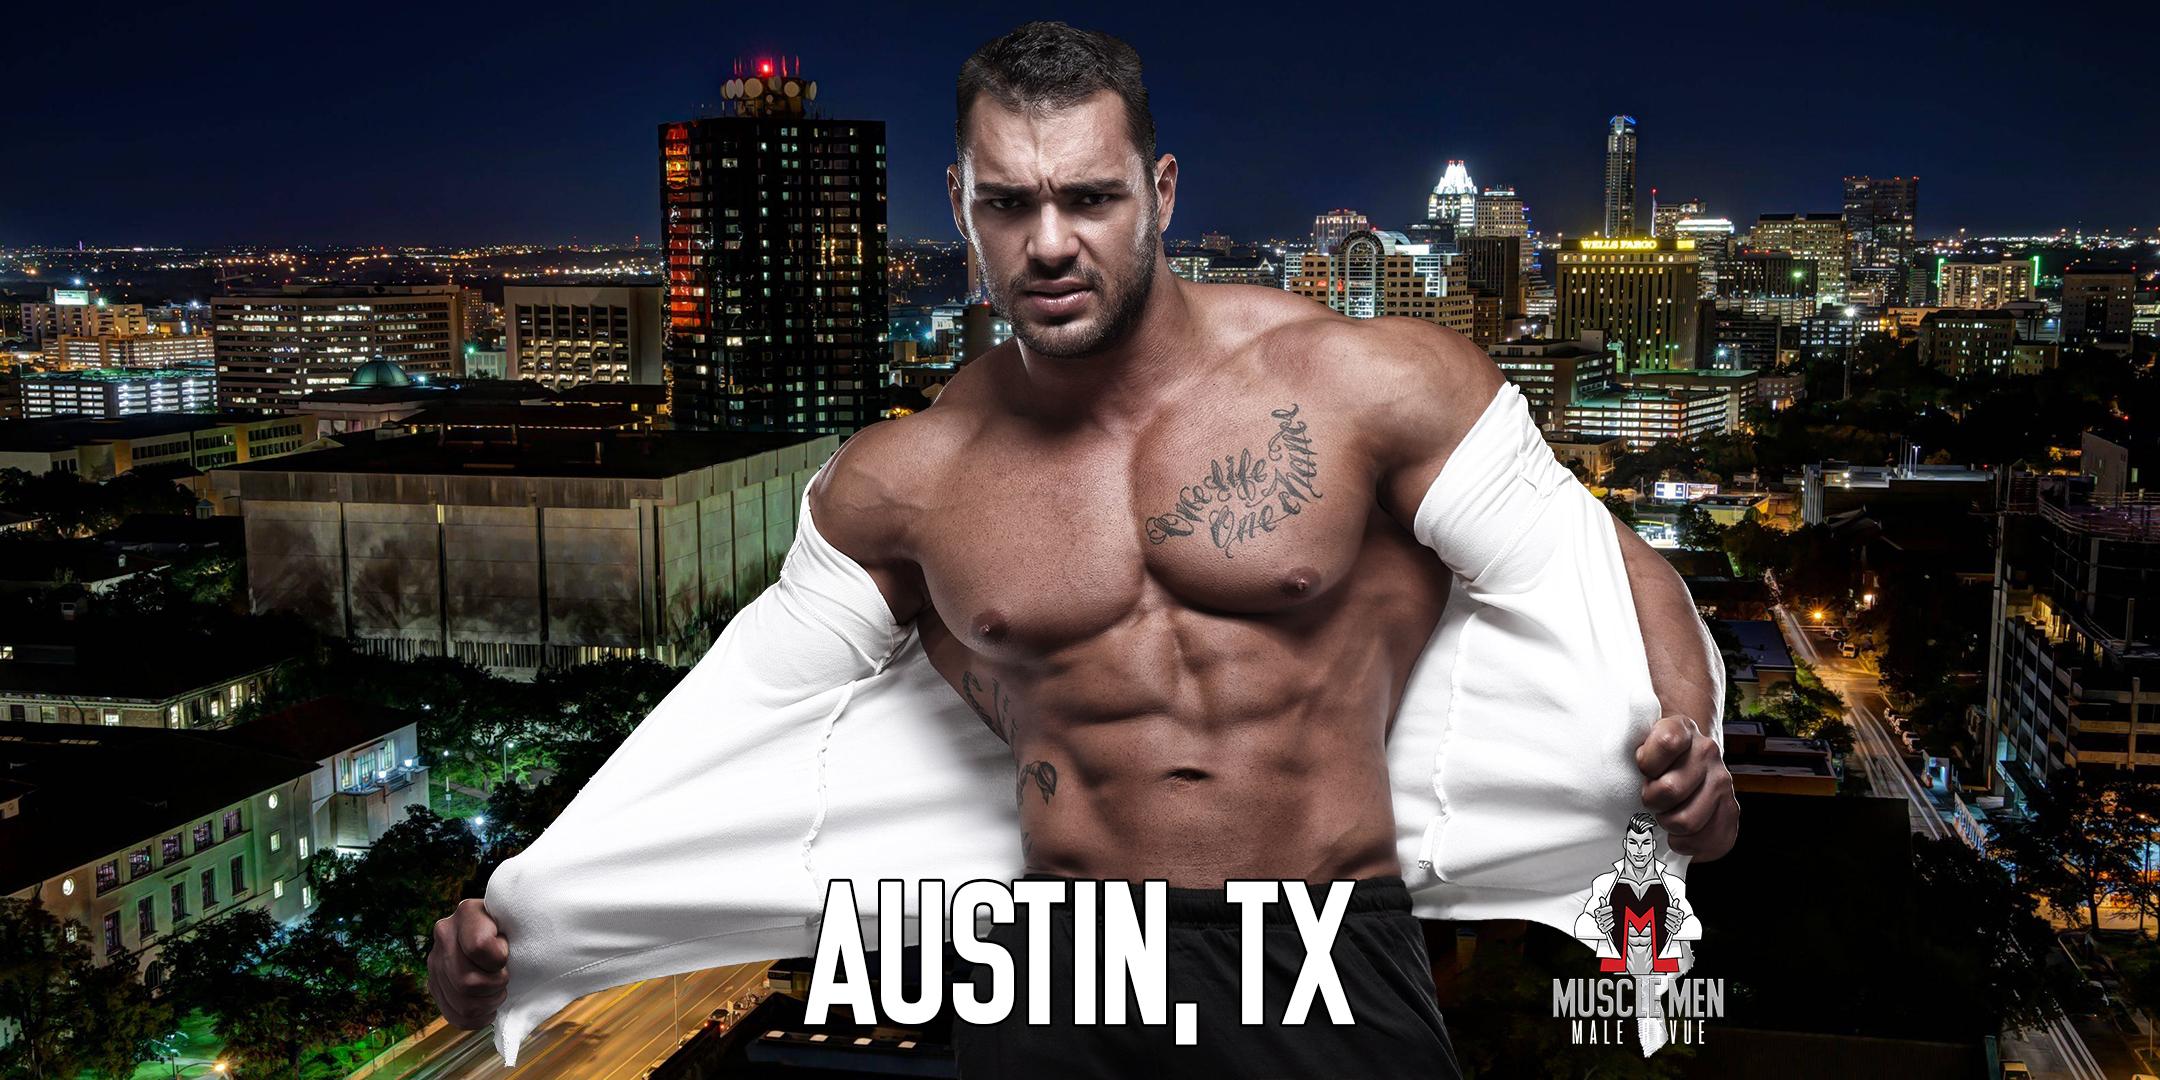 Muscle Men Male Strippers Revue Show & Male Strip club Shows Austin TX - 8pm to10pm